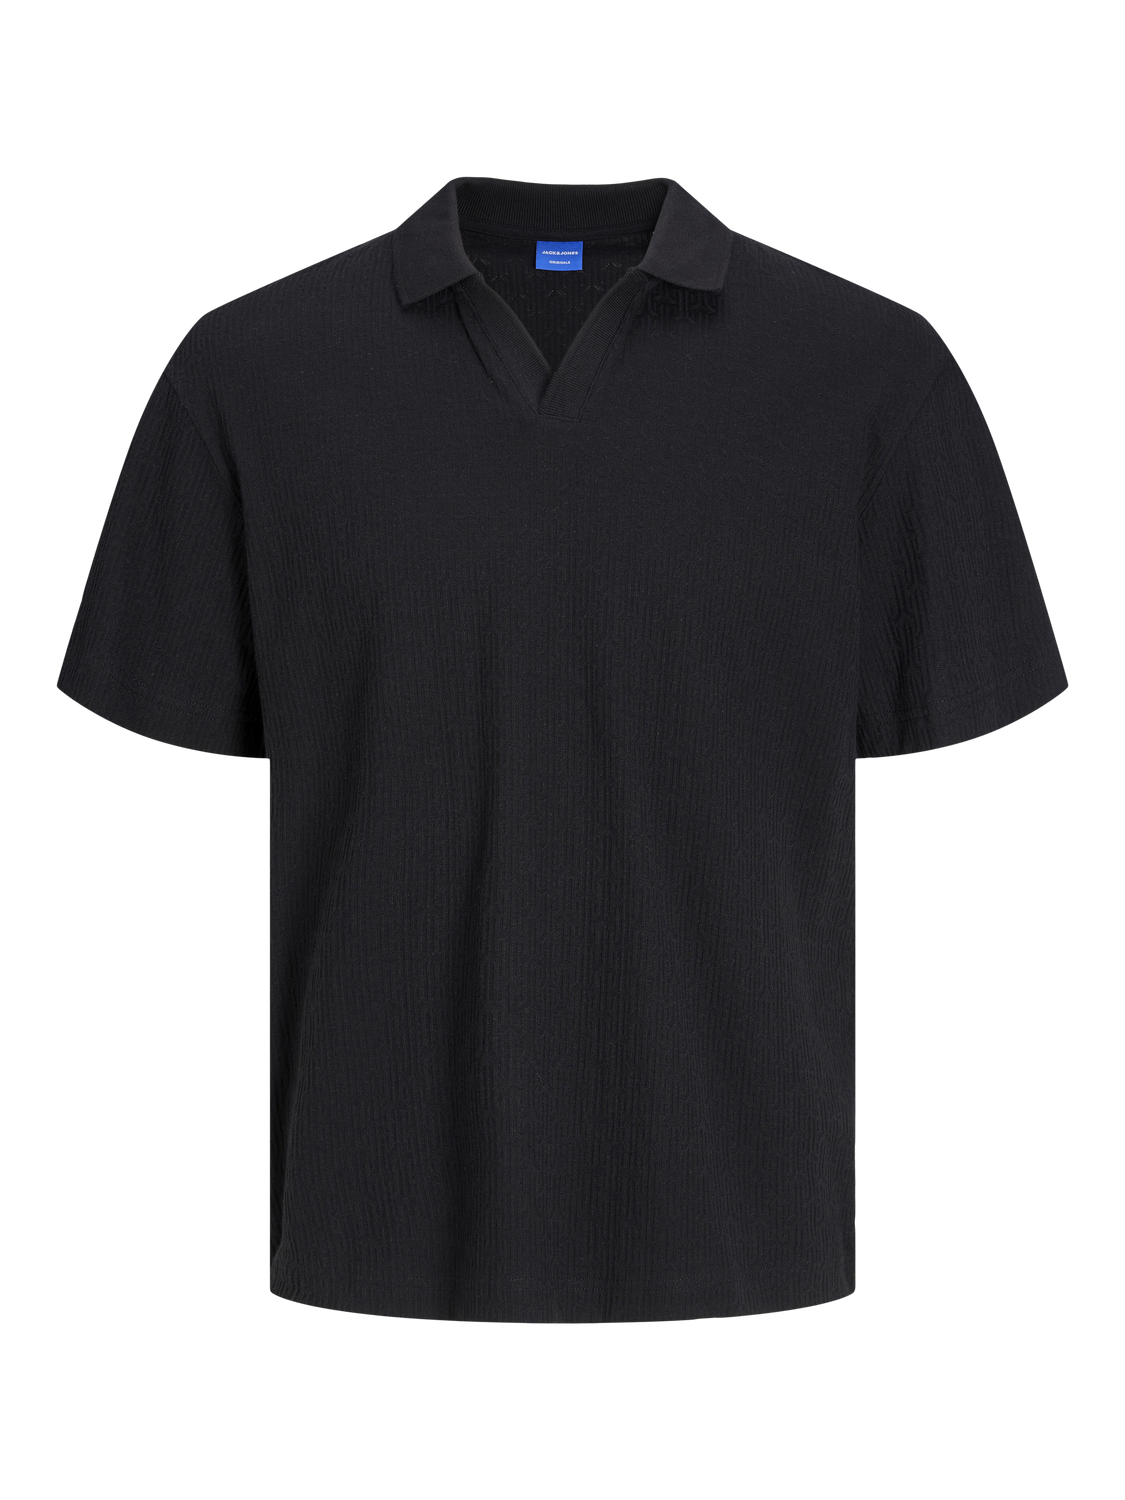 Jack & Jones Relaxed Fit Flat collar Polo -Black - 12253617